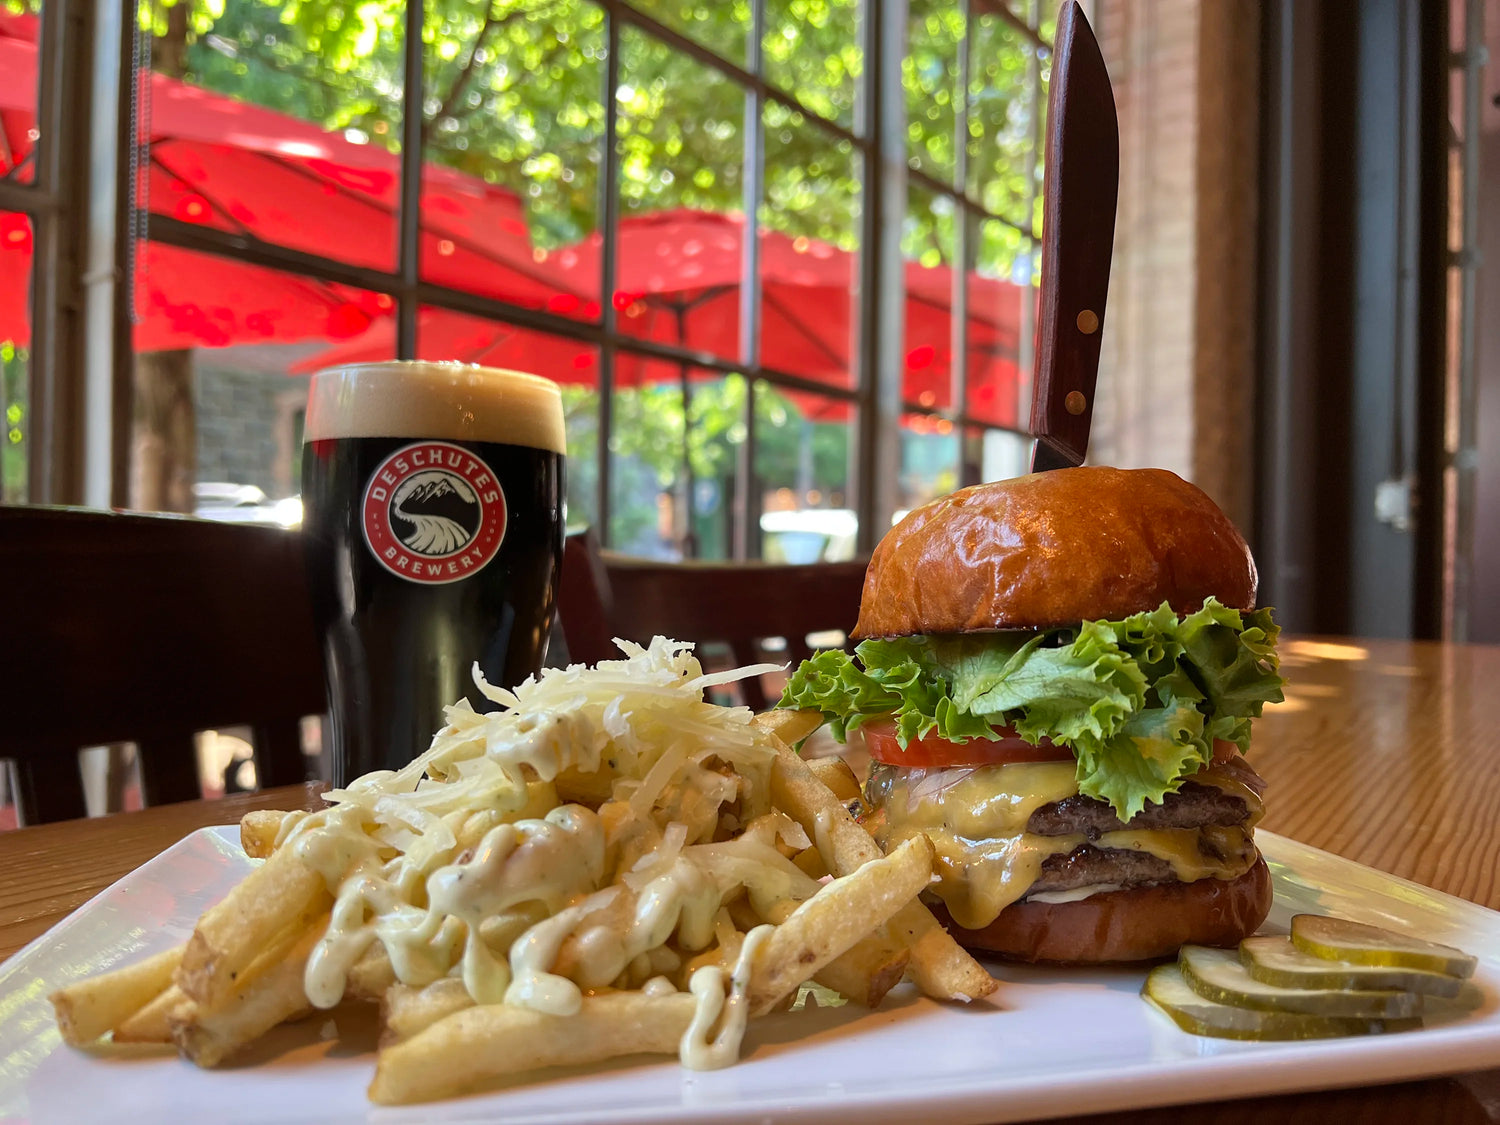 A photograph of burgers and fries with a beer on an inside table.